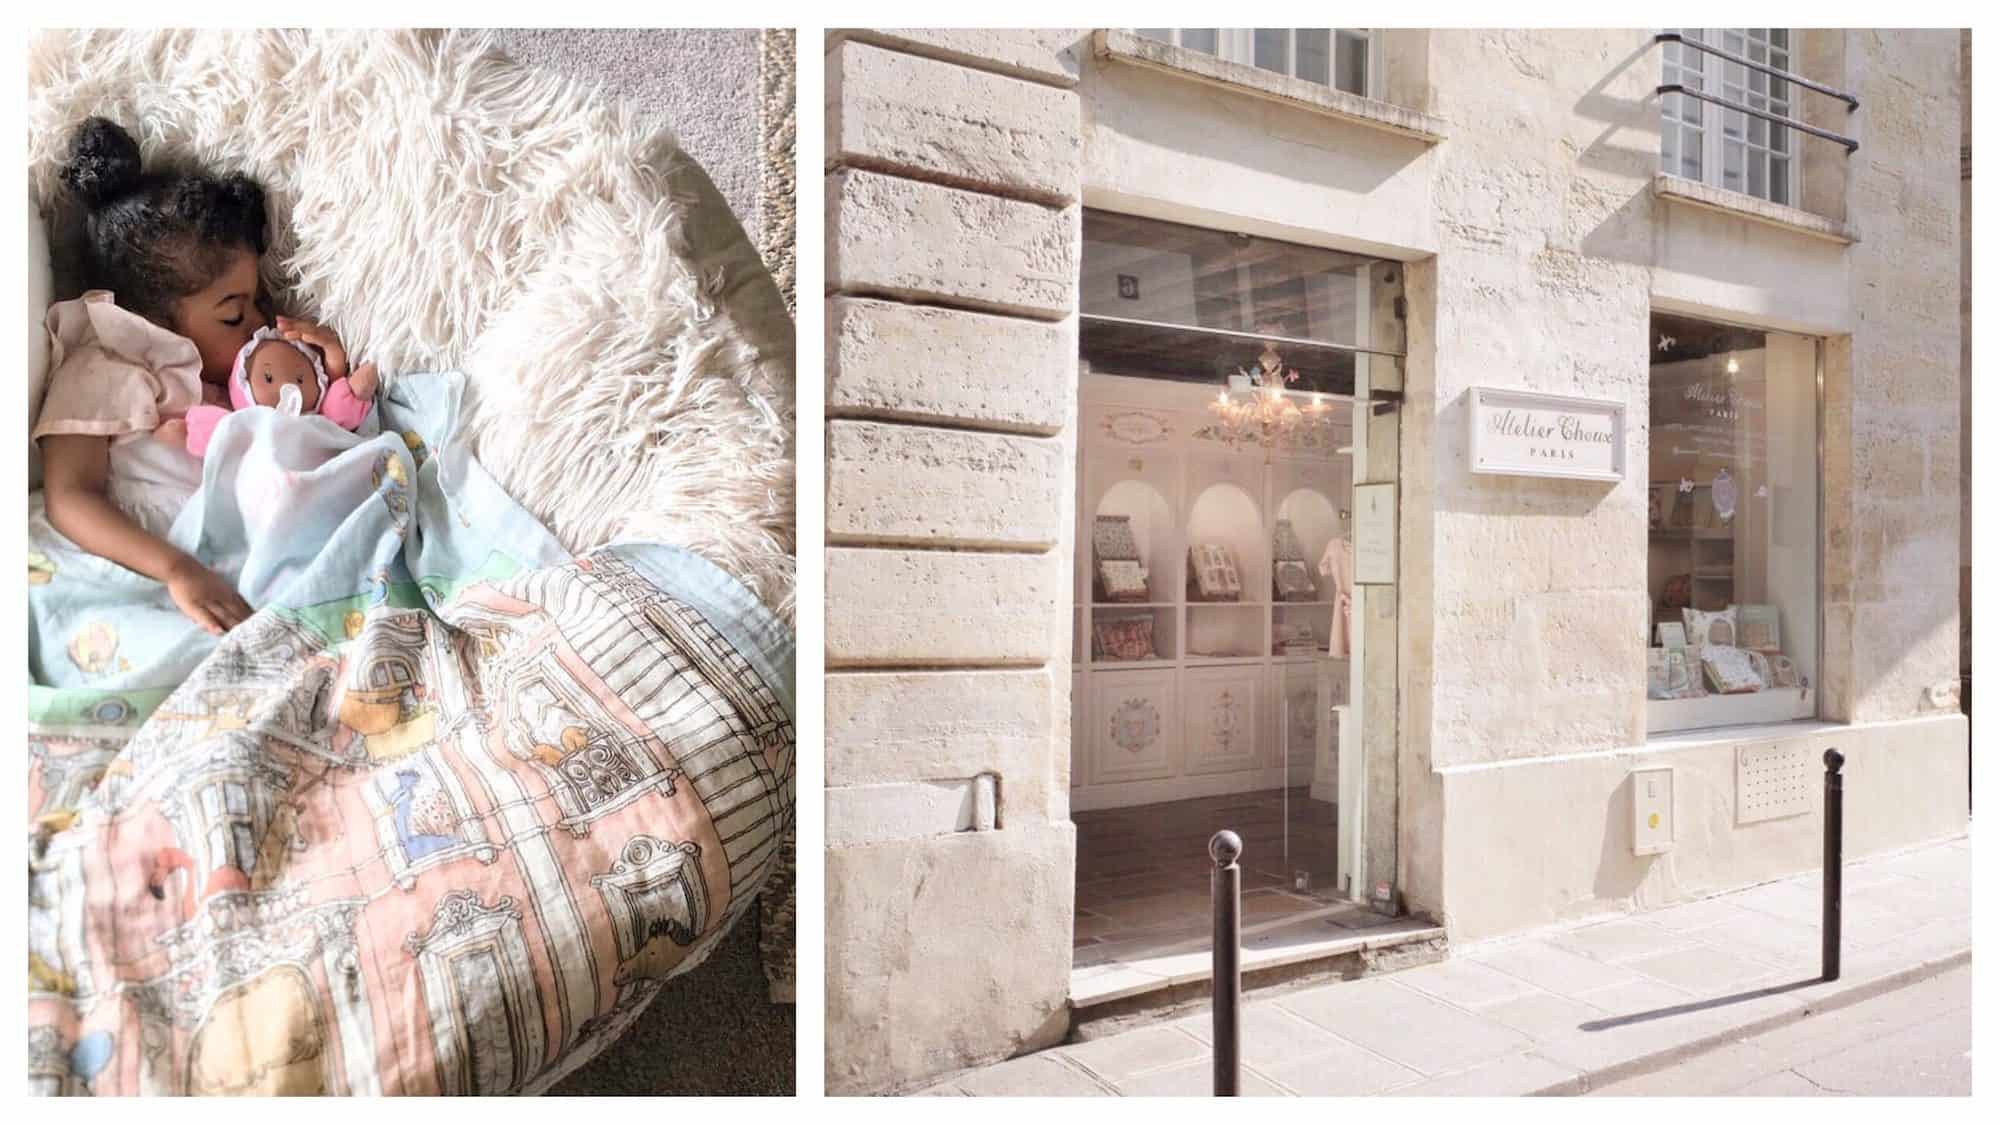 A little girl sleeping with her doll in a fluffy cushion chair (left). Outside Atelier Choux, a Parisian store for kids' clothing (right).